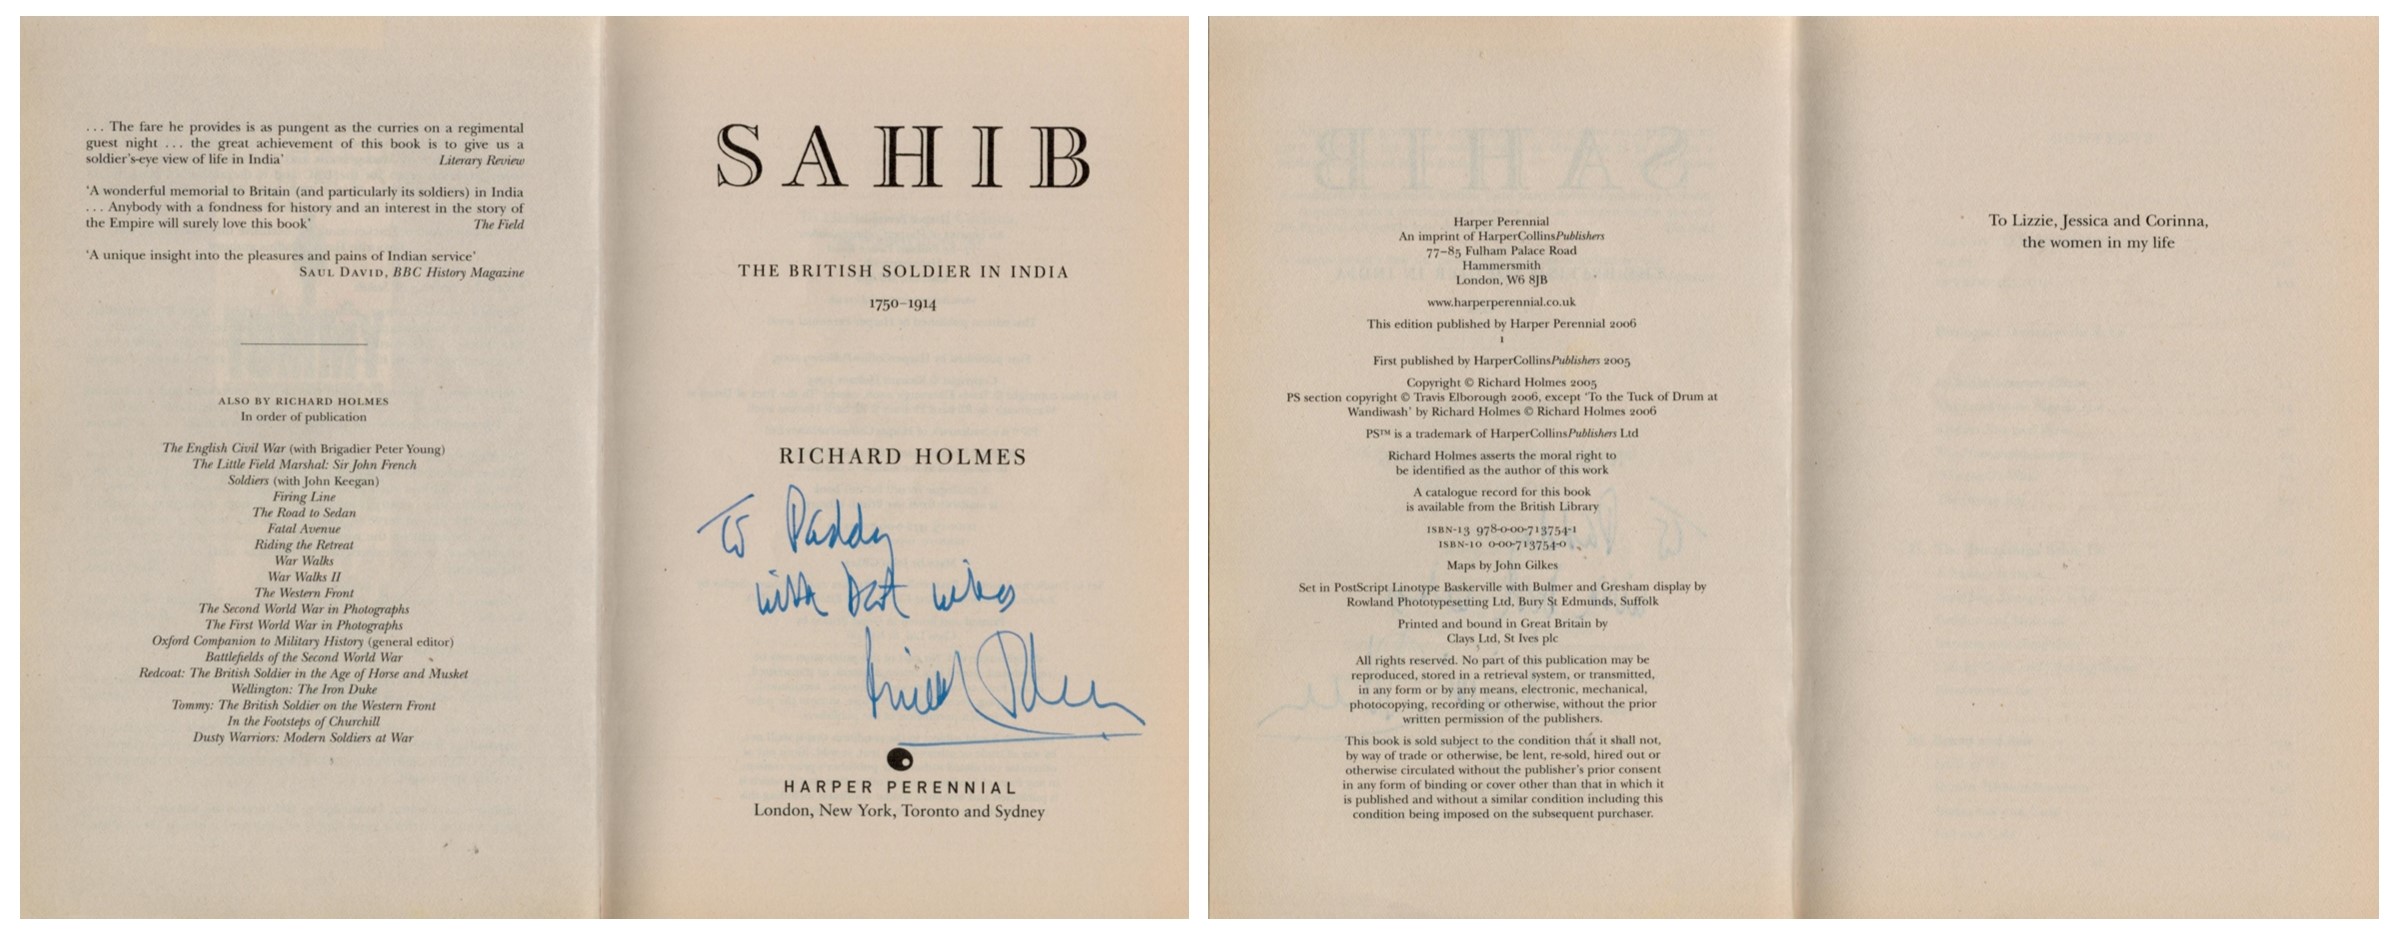 SAHIB The British Soldier In India 1750-1914 Signed by Author Richard Holmes Paperback book. - Image 4 of 6